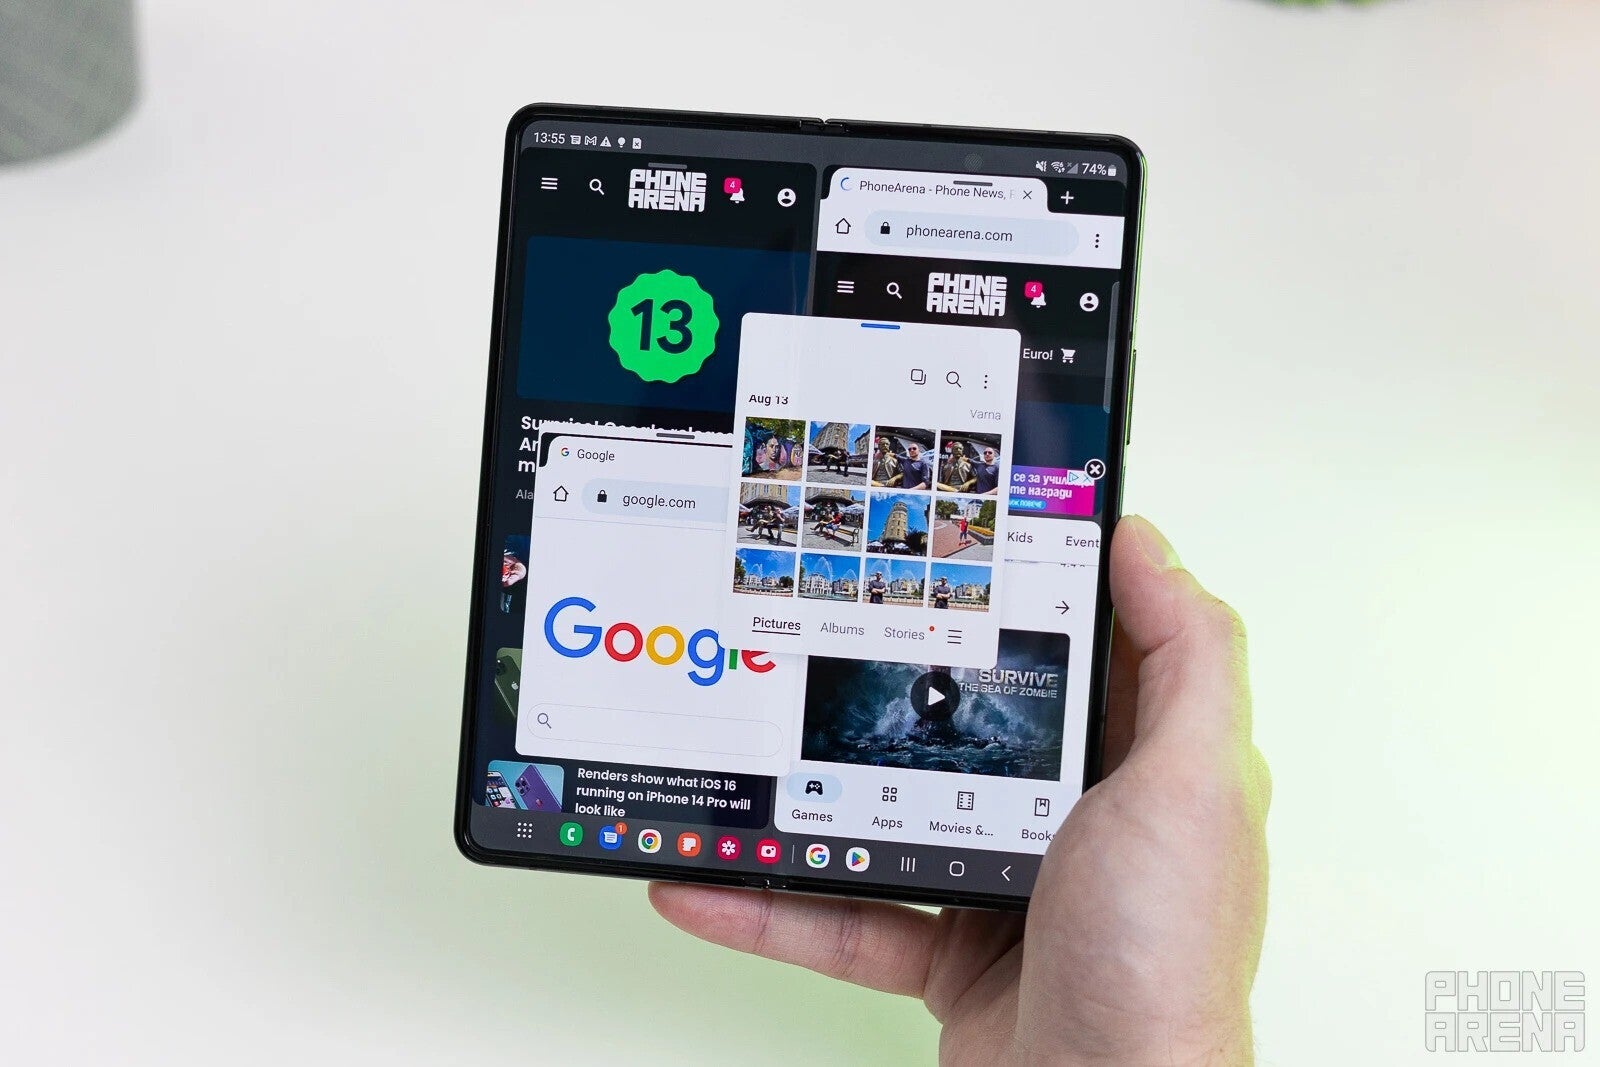 The multitasking experience on the Z Fold 4 (shown here) is excellent - Pixel Fold, Z Fold 5, S23 Ultra: Picking my next big phone is going to be tough in 2023!